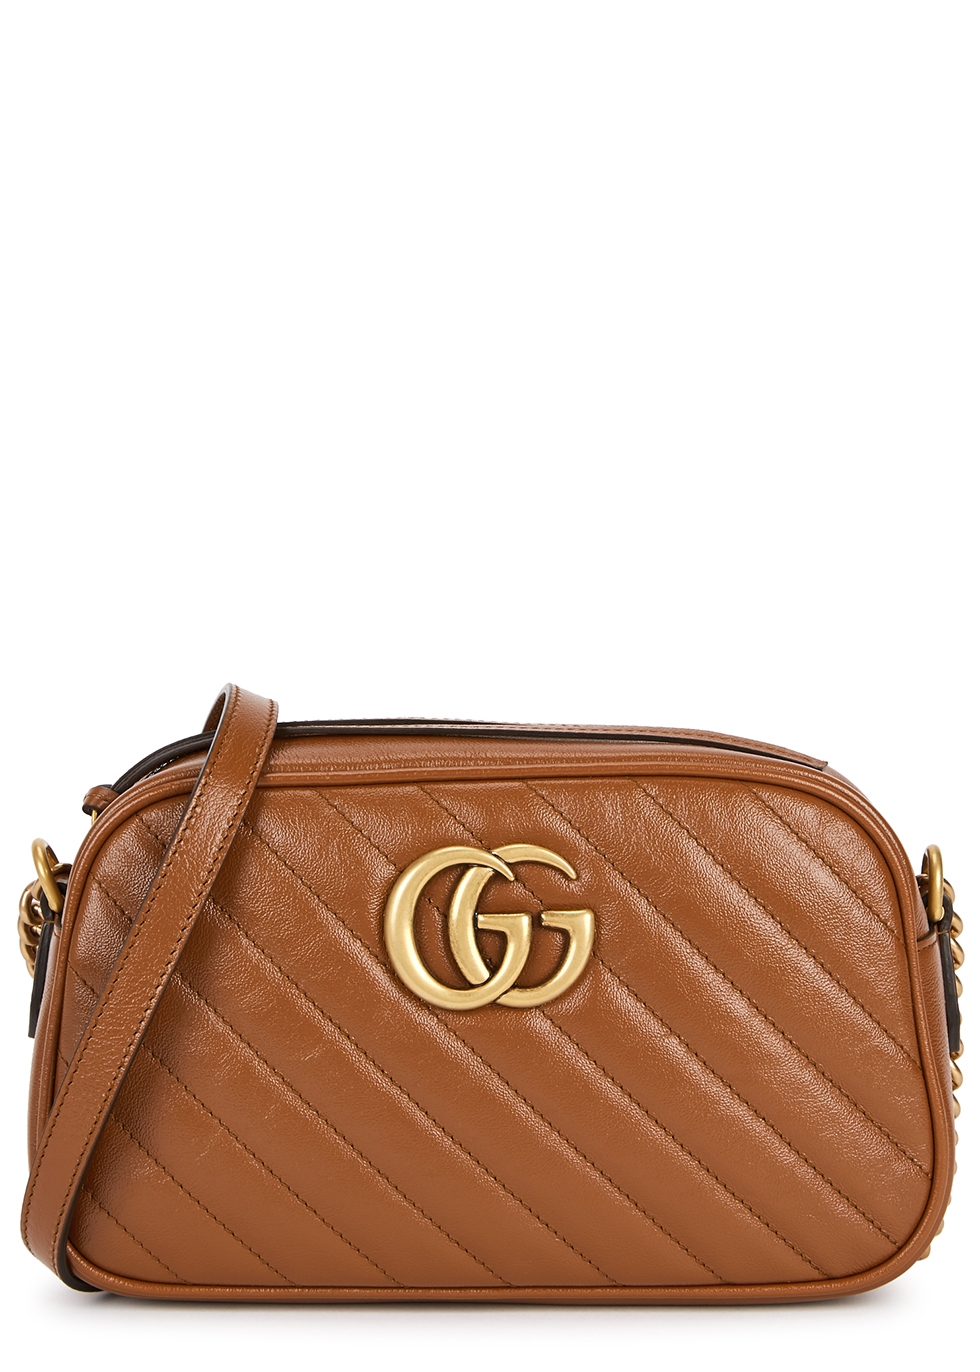 Gucci GG Marmont small brown leather 